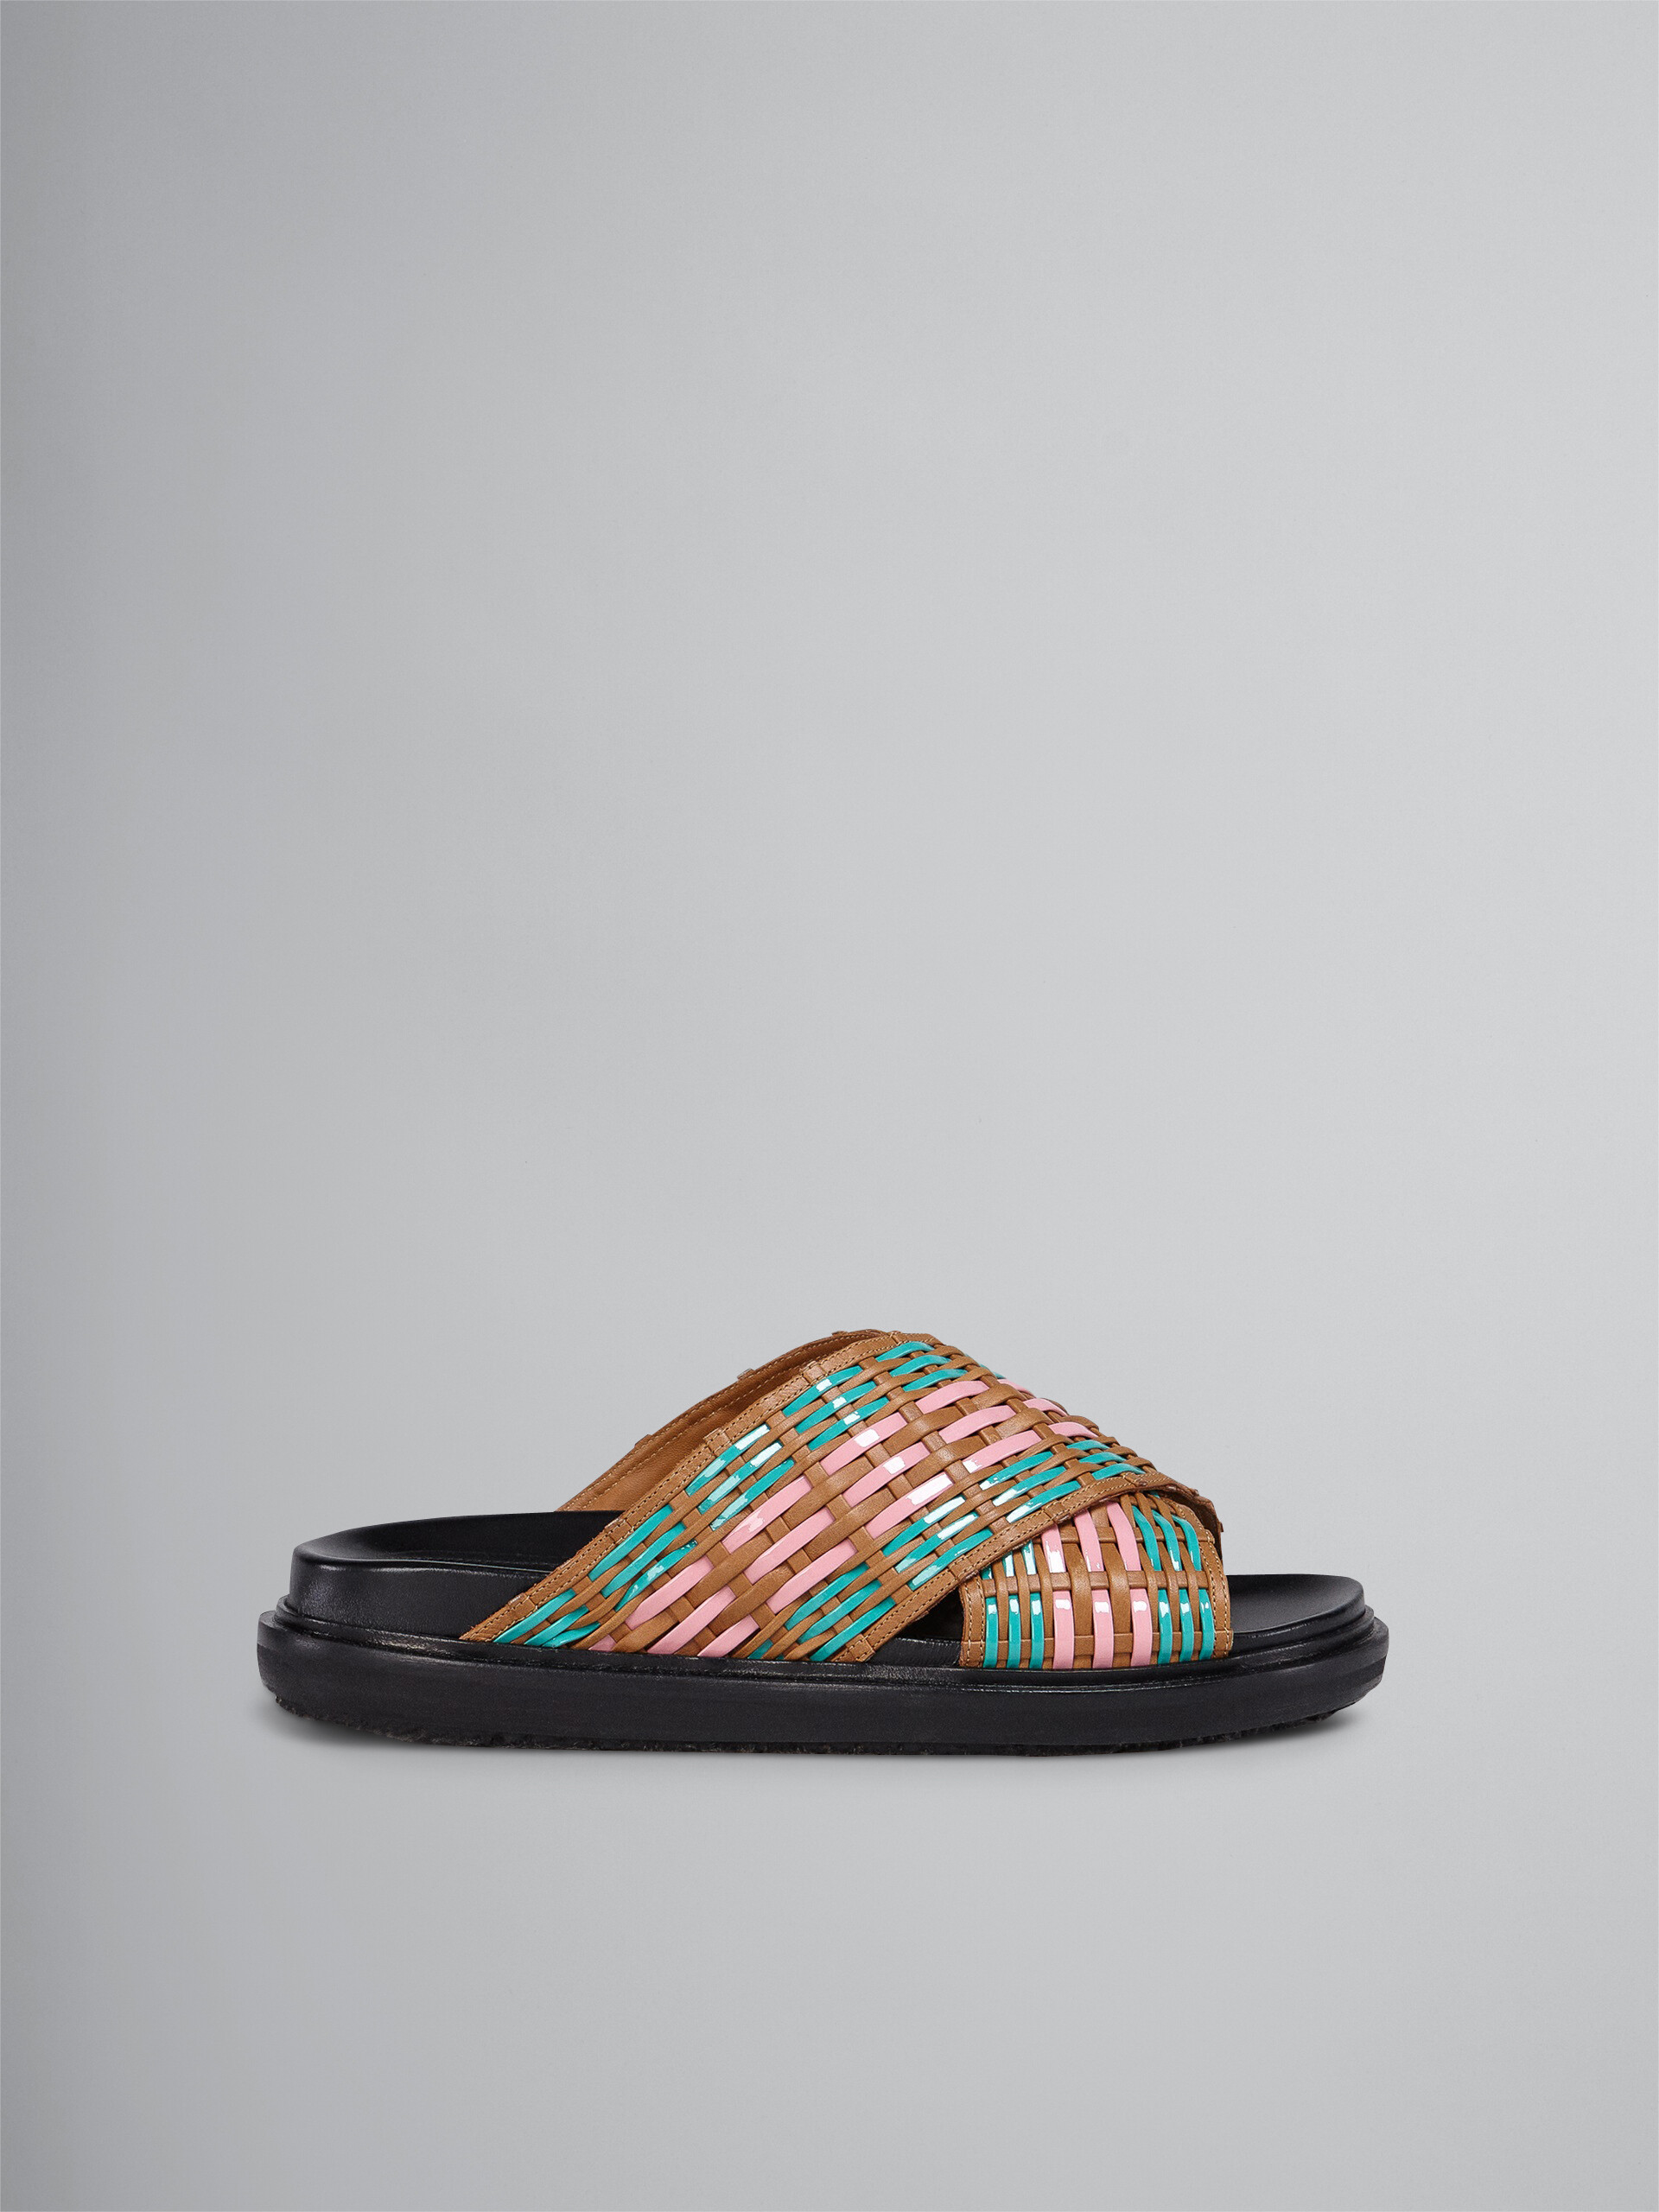 Woven leather Fussbett - Sandals - Image 1